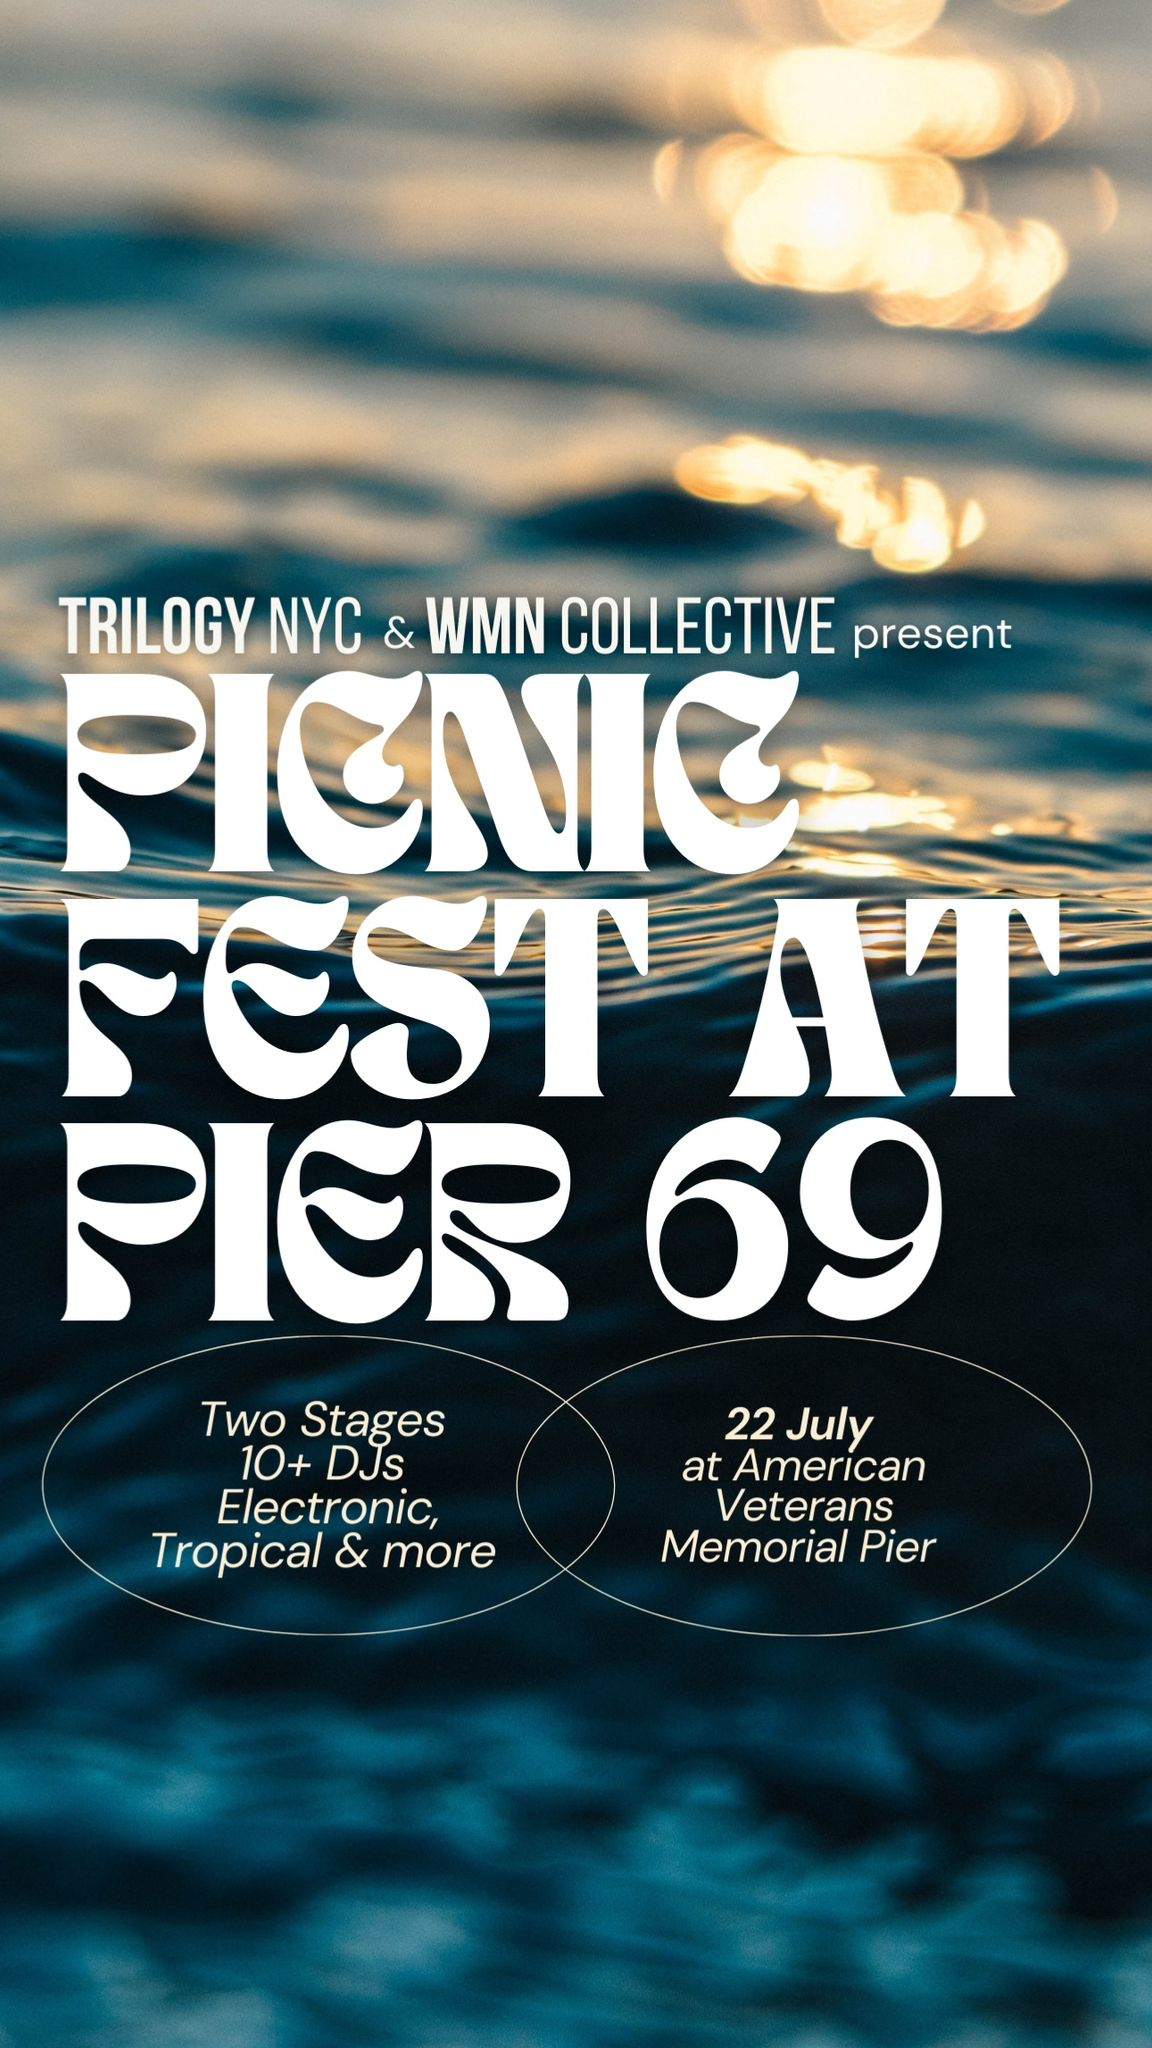 Trilogy NYC & WMN collective present: Picnic Fest at Pier 69 - フライヤー表